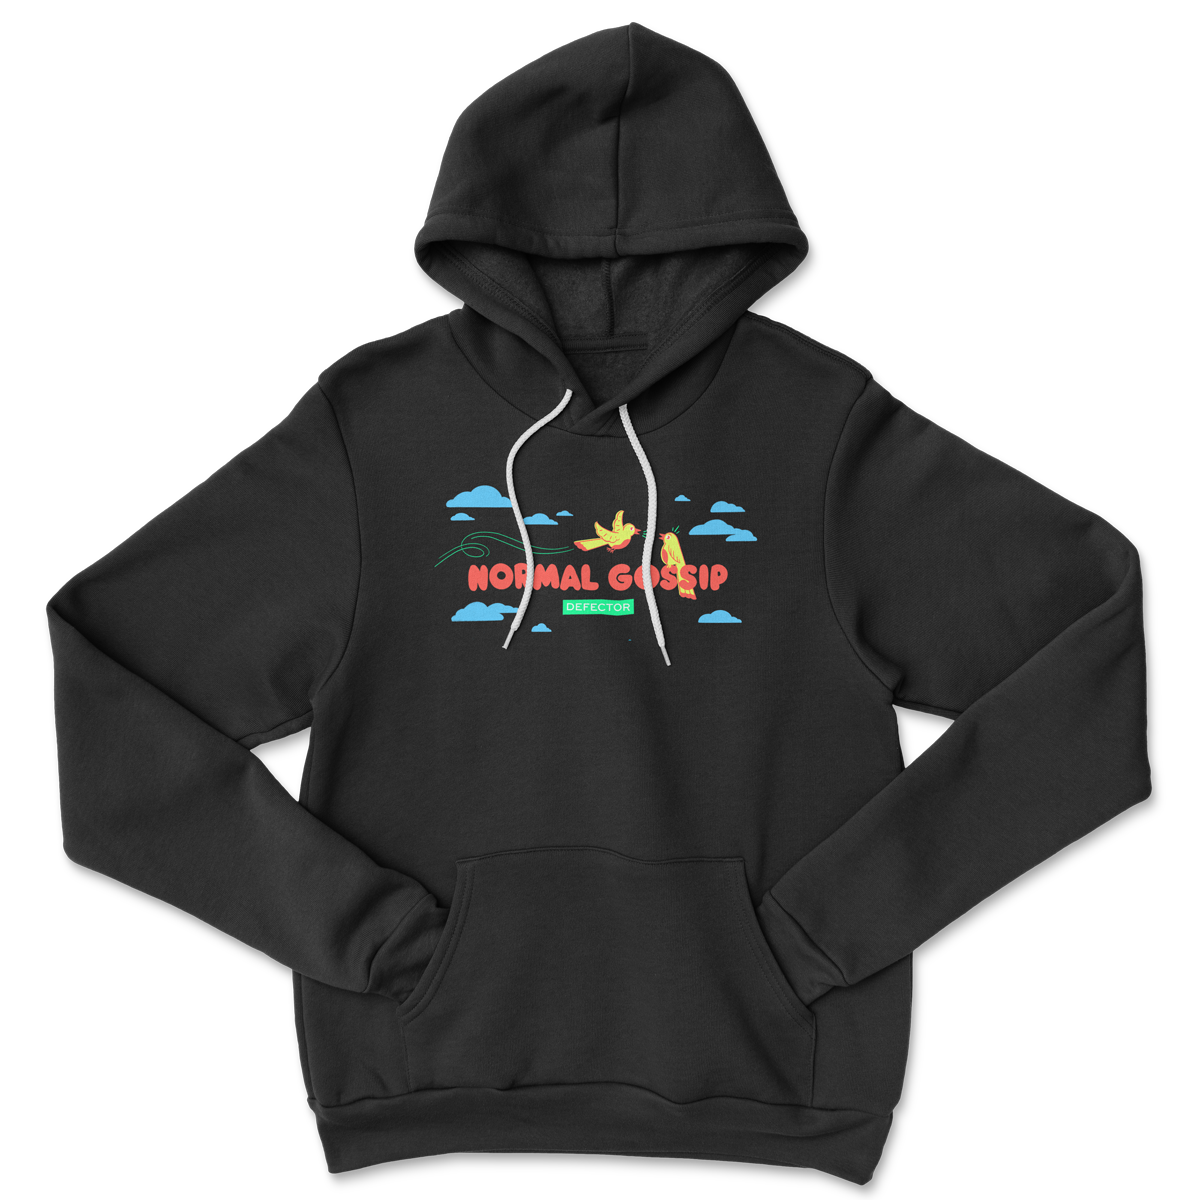 A plain black hoodie, with a Normal Gossip logo on it. Surrounding that are two chirping birds, and there are blue clouds on it as well.